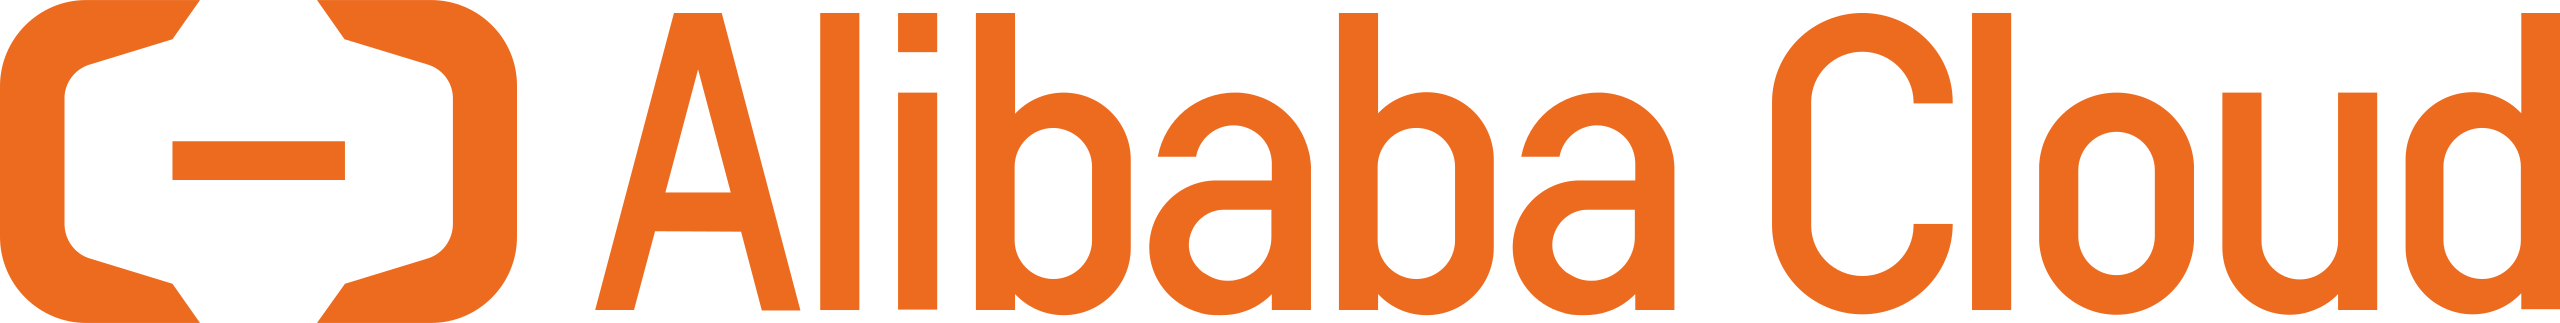 Image result for ALIBABA CLOUD